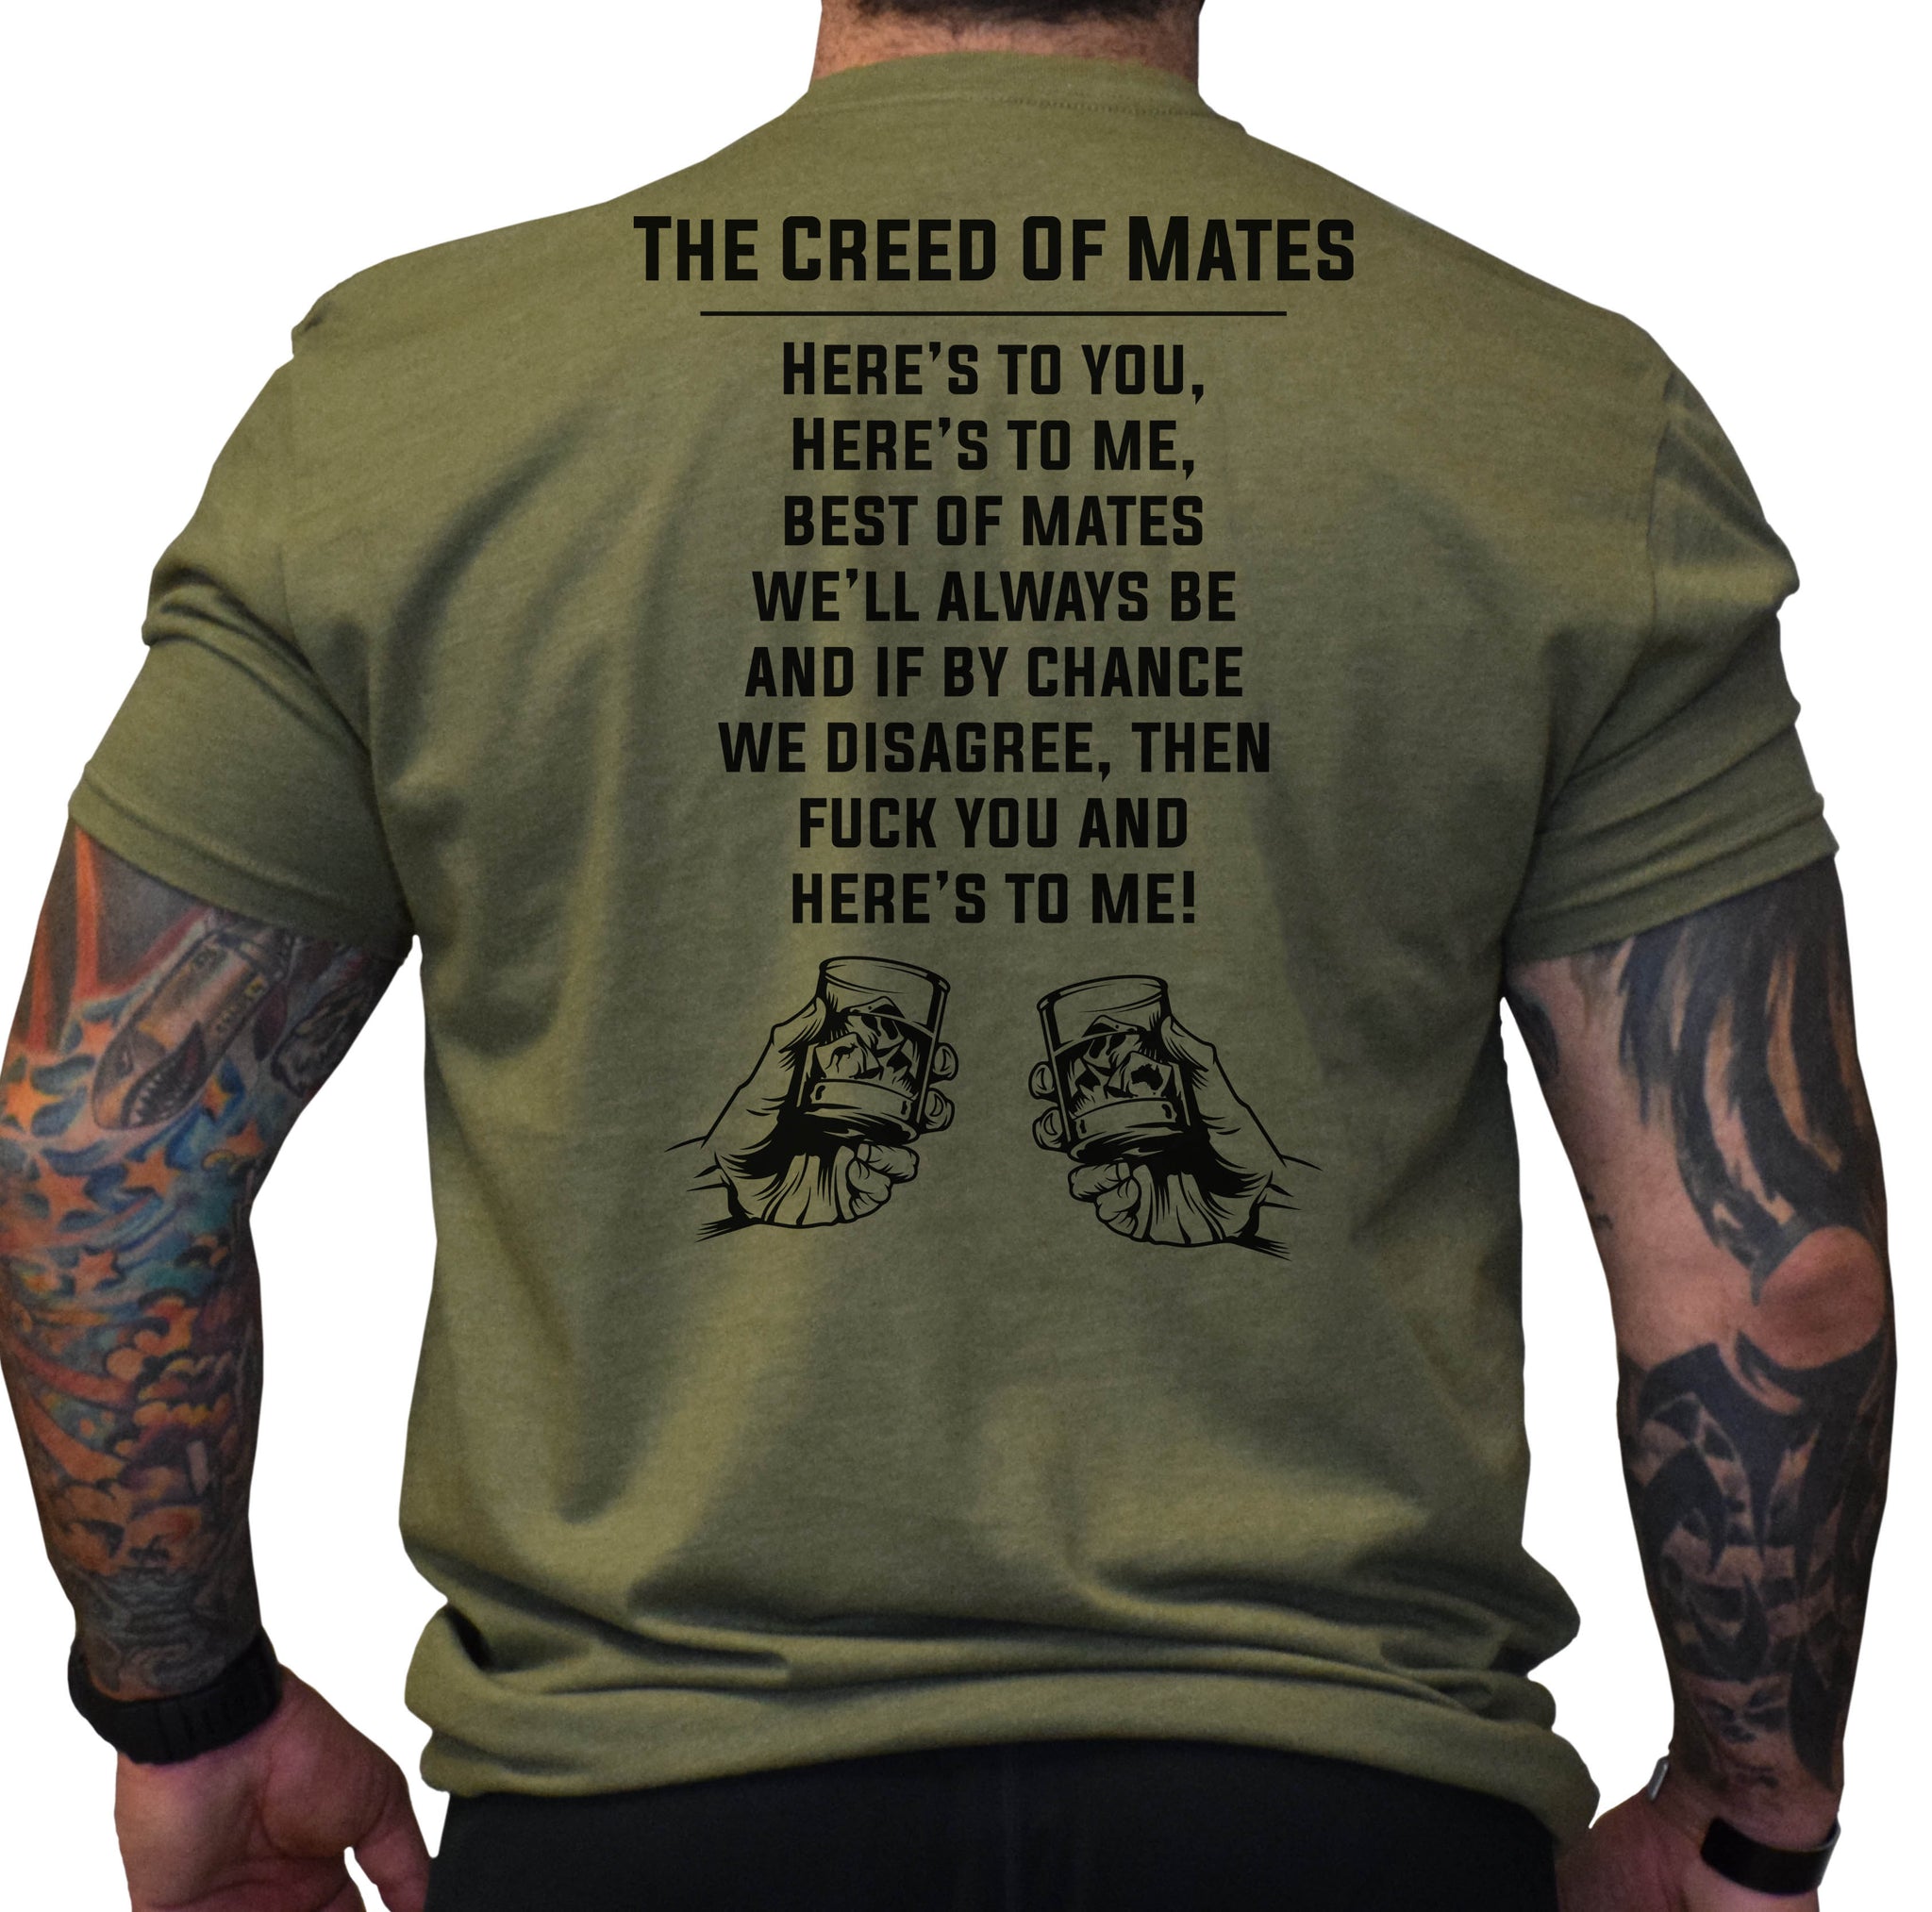 The Creed of Mates